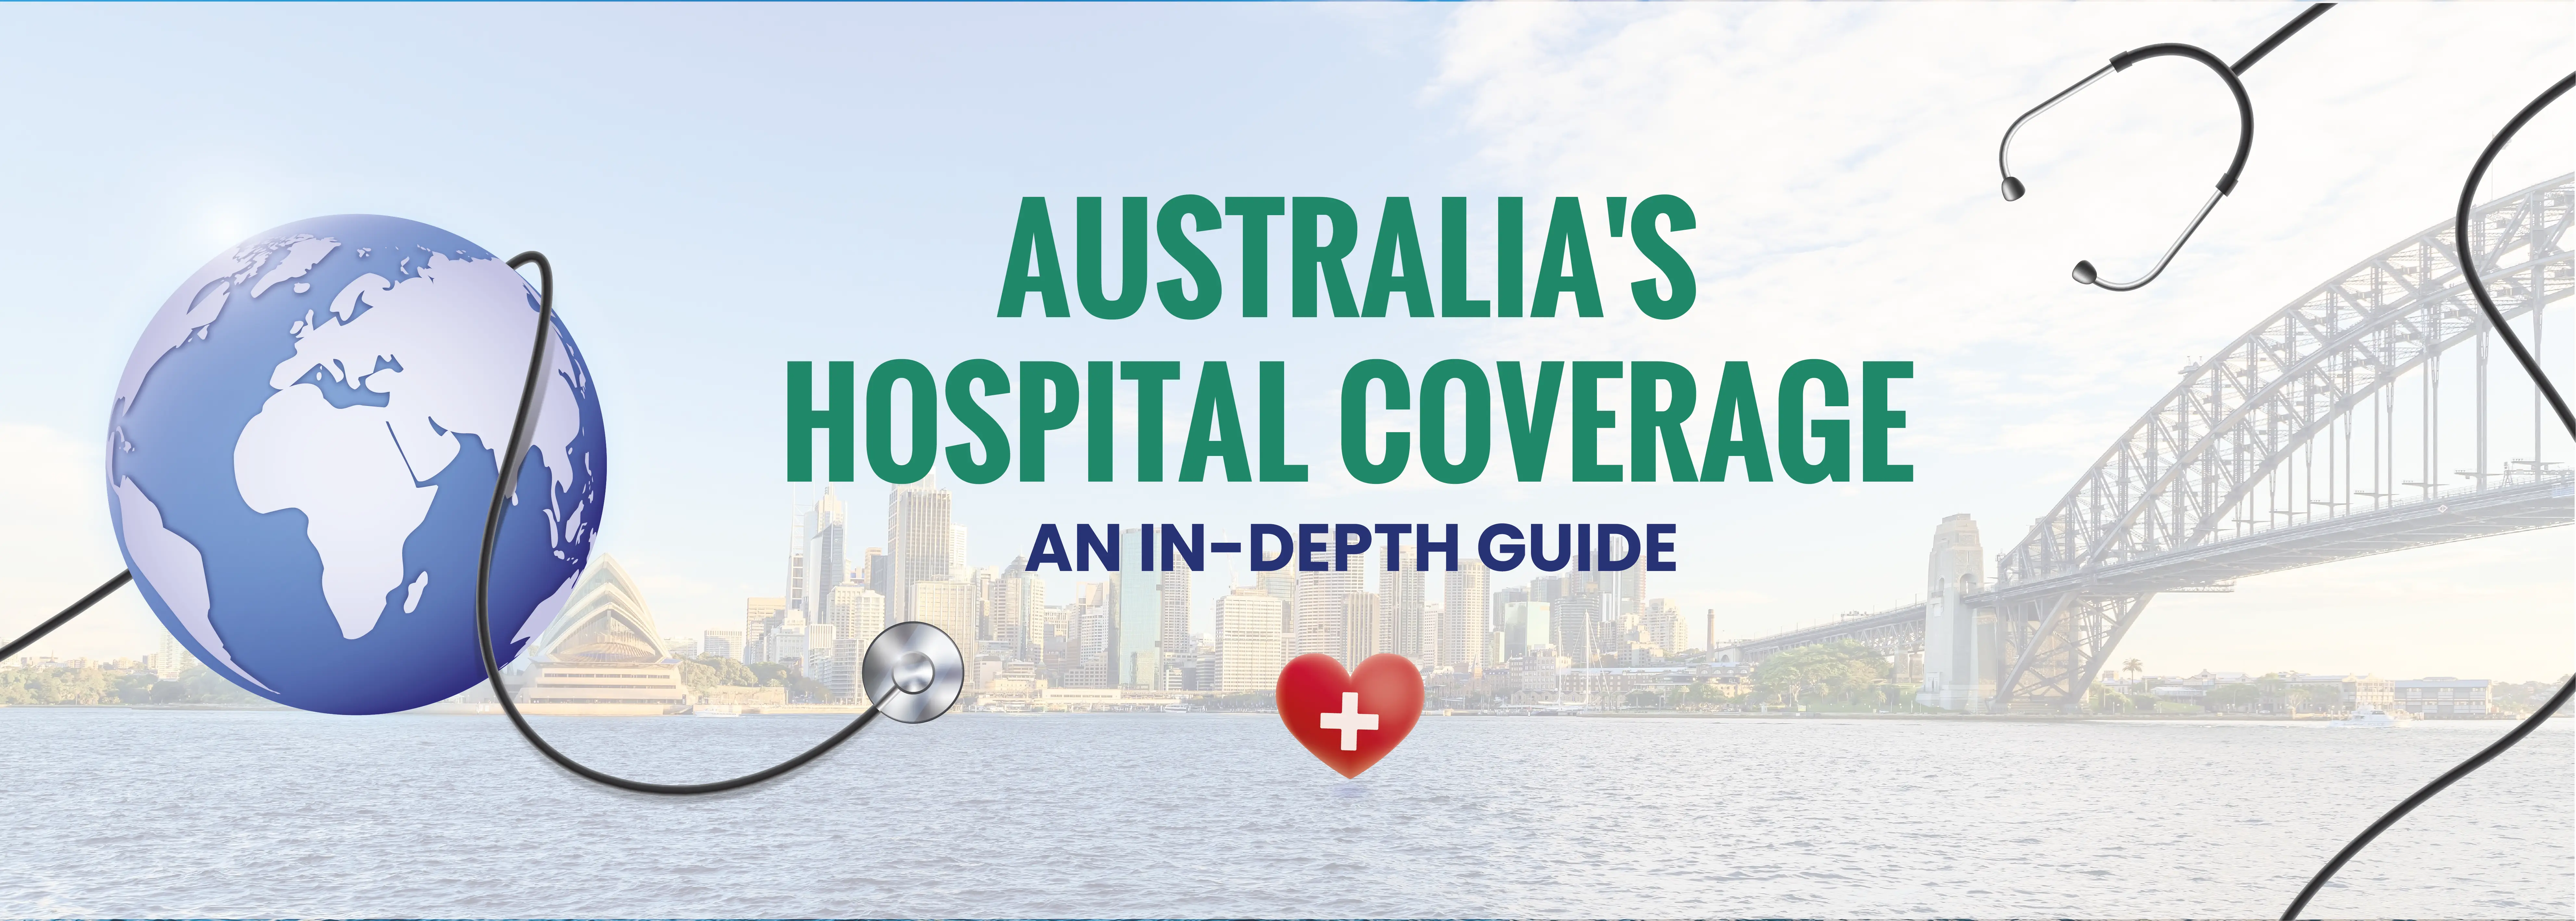 Australia's Hospital Coverage: An In-Depth Guide